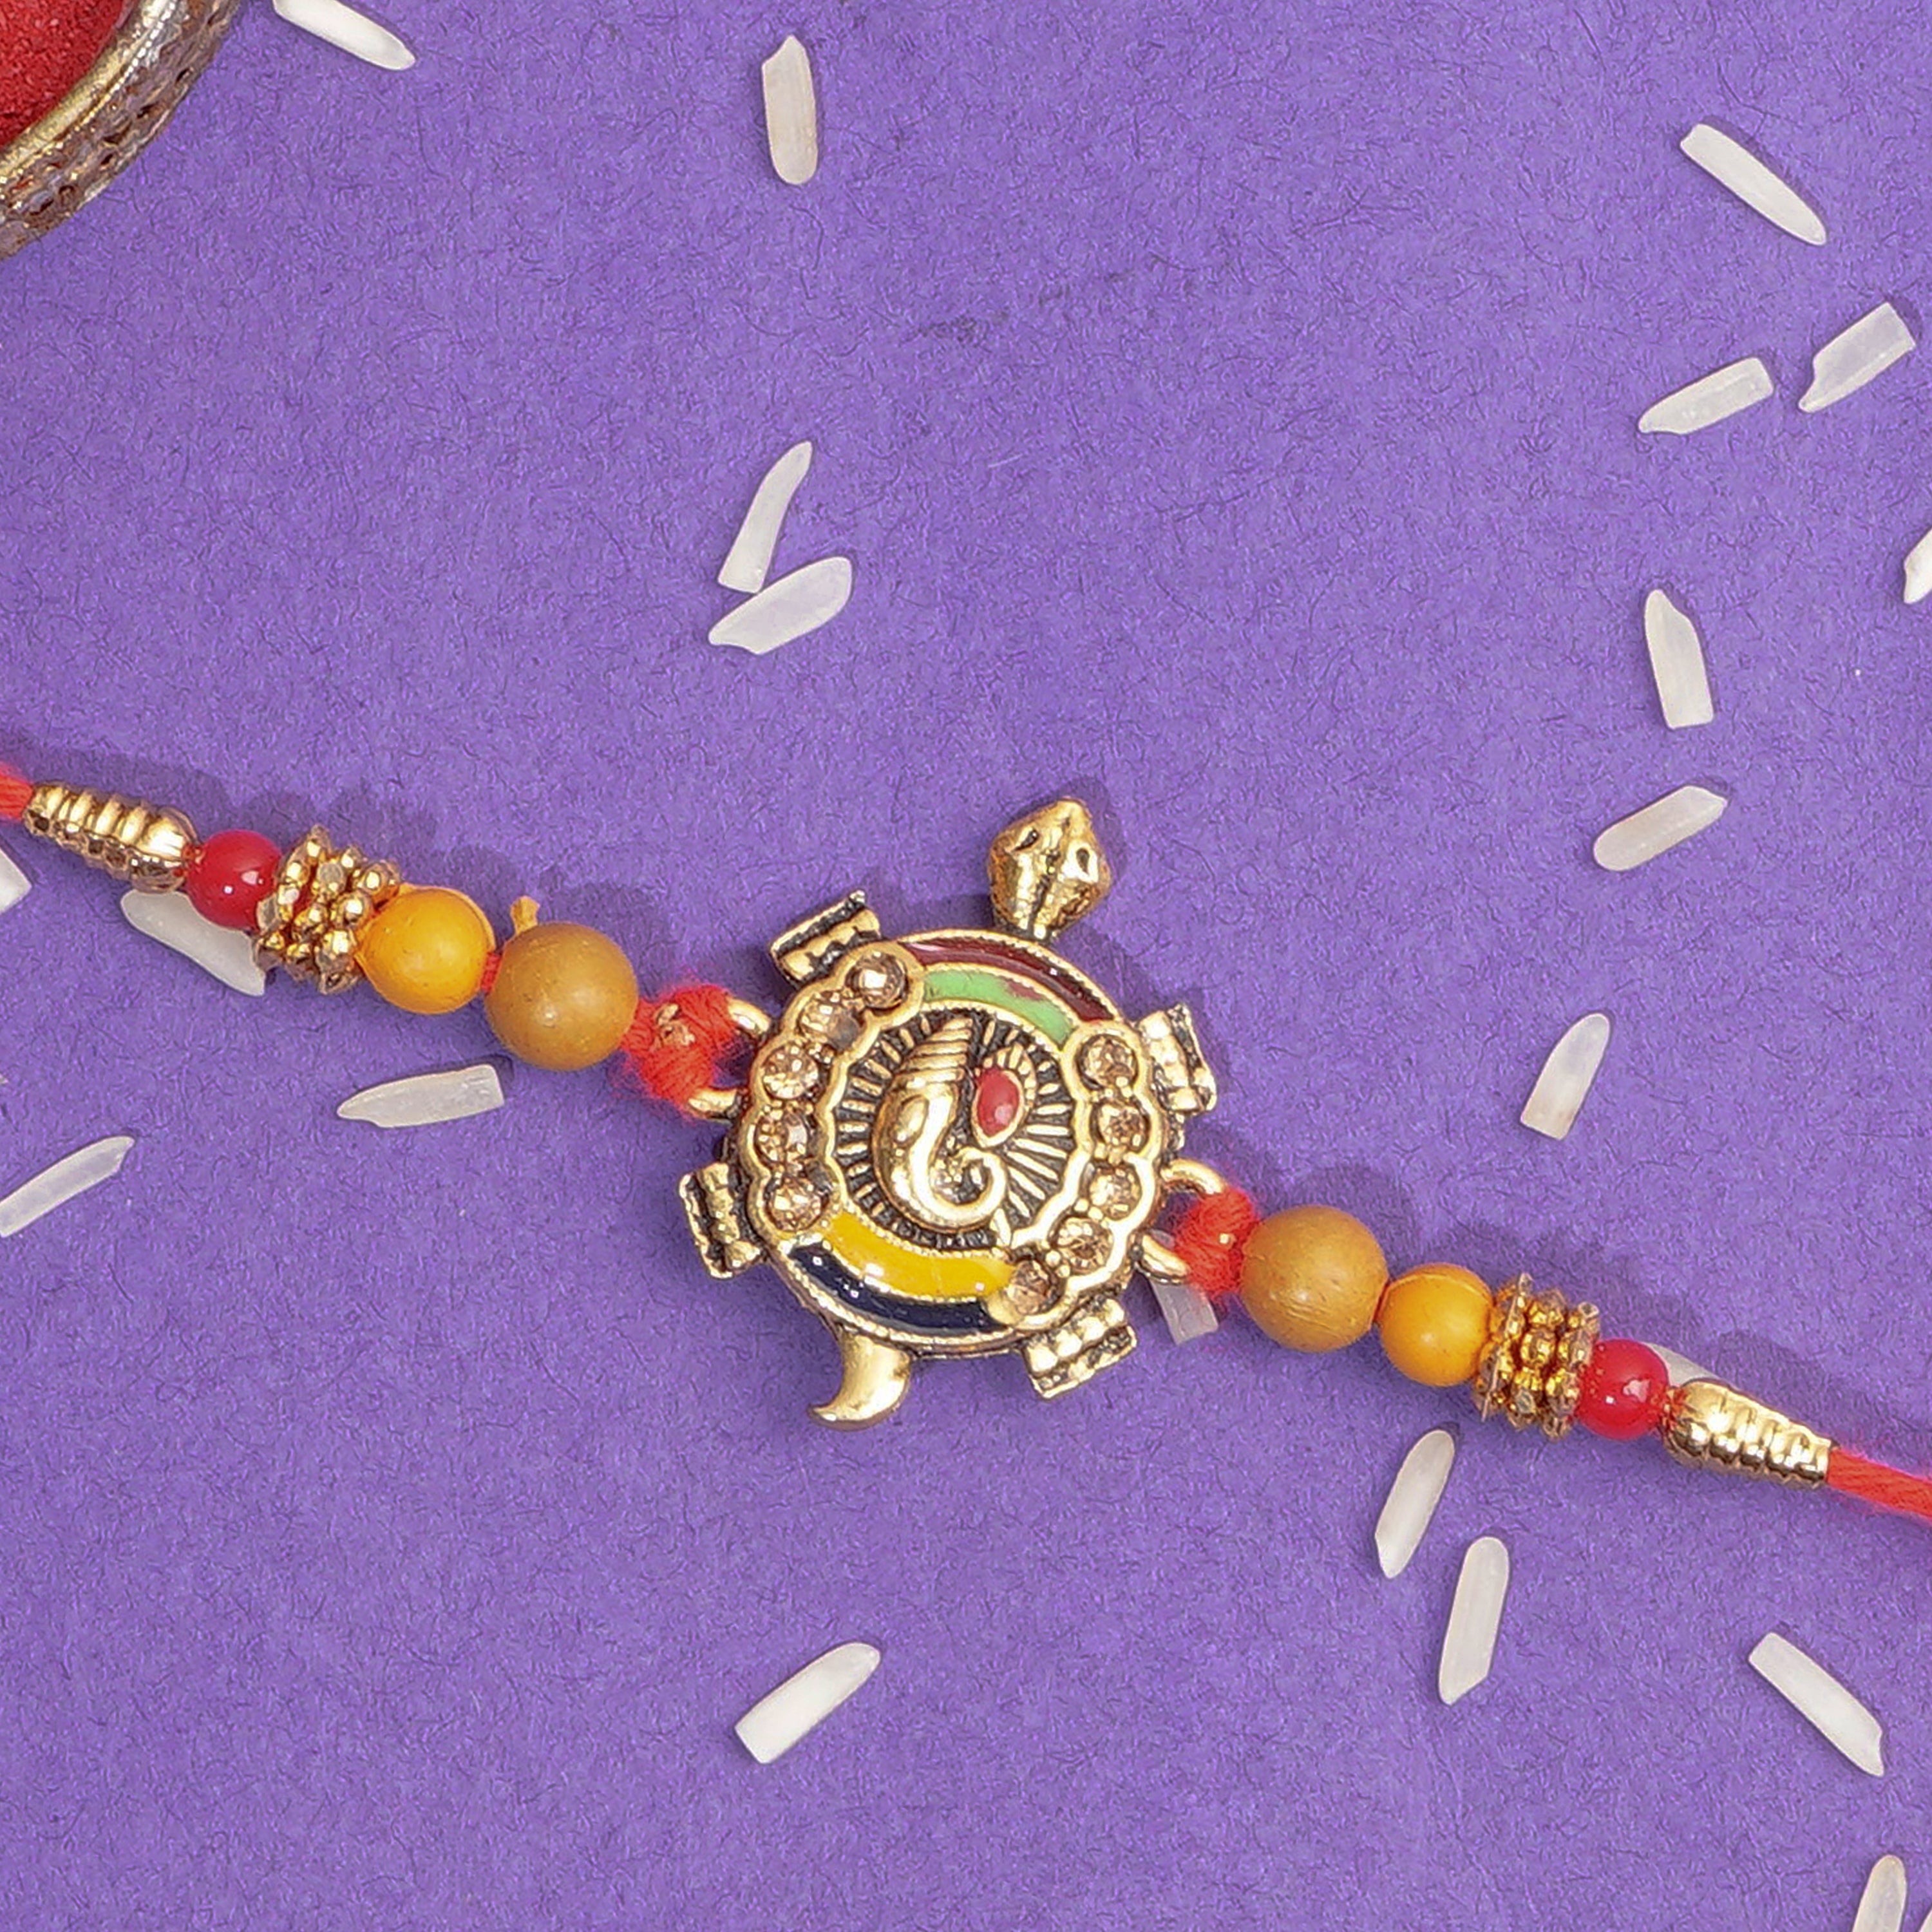 Design Arche auspicious Rakhi for brother for peace and prosperity